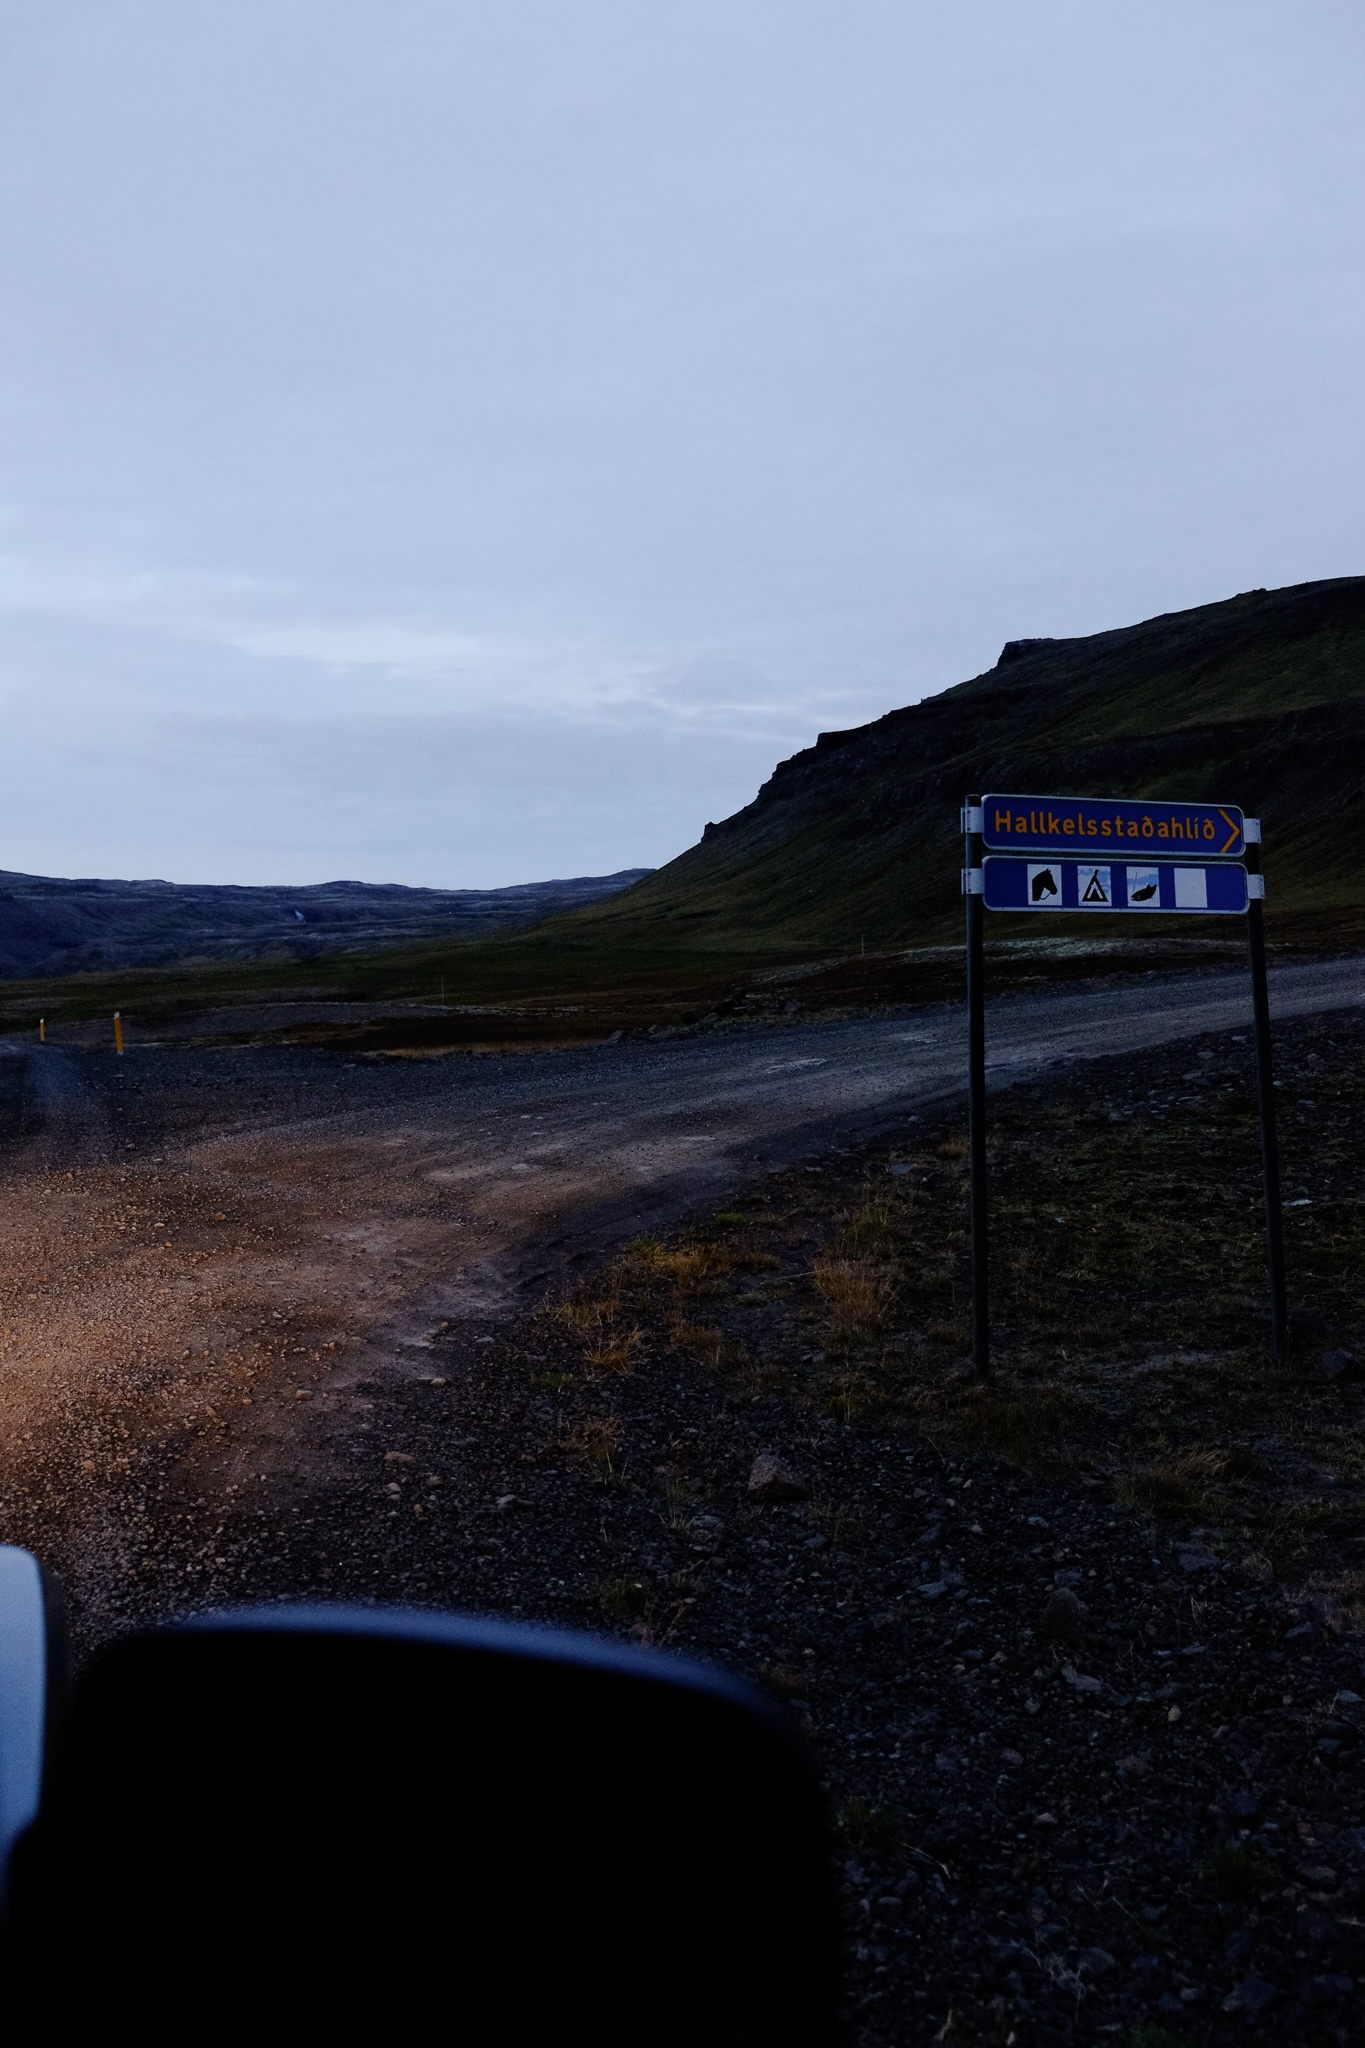 At dusk, a blue sign with yellow writing indicates to turn right towards the farm